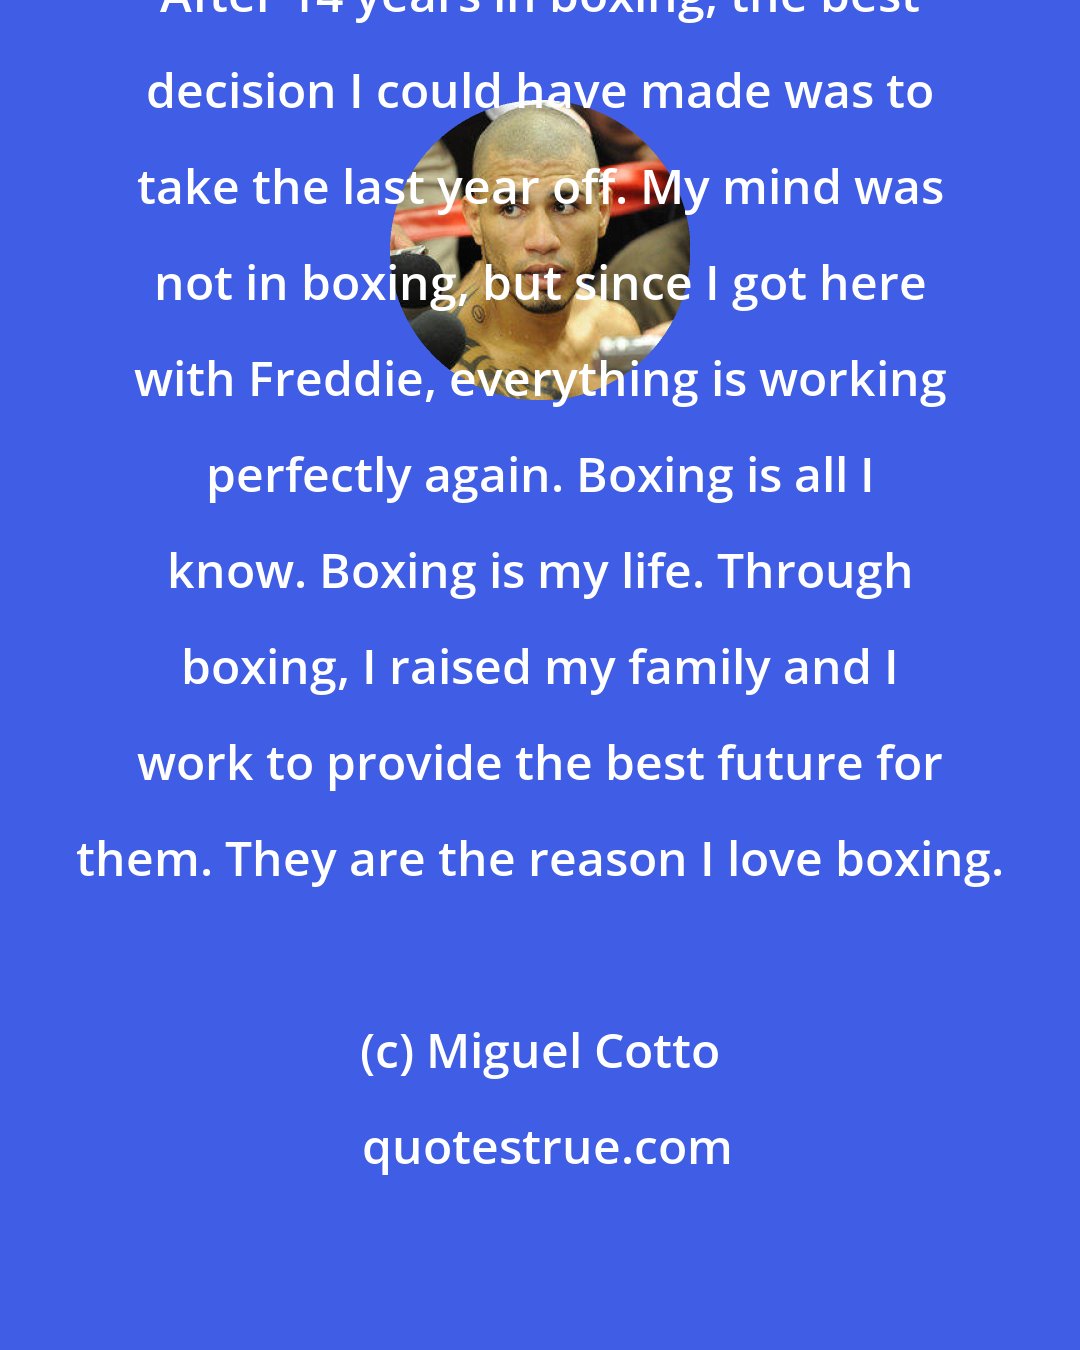 Miguel Cotto: After 14 years in boxing, the best decision I could have made was to take the last year off. My mind was not in boxing, but since I got here with Freddie, everything is working perfectly again. Boxing is all I know. Boxing is my life. Through boxing, I raised my family and I work to provide the best future for them. They are the reason I love boxing.